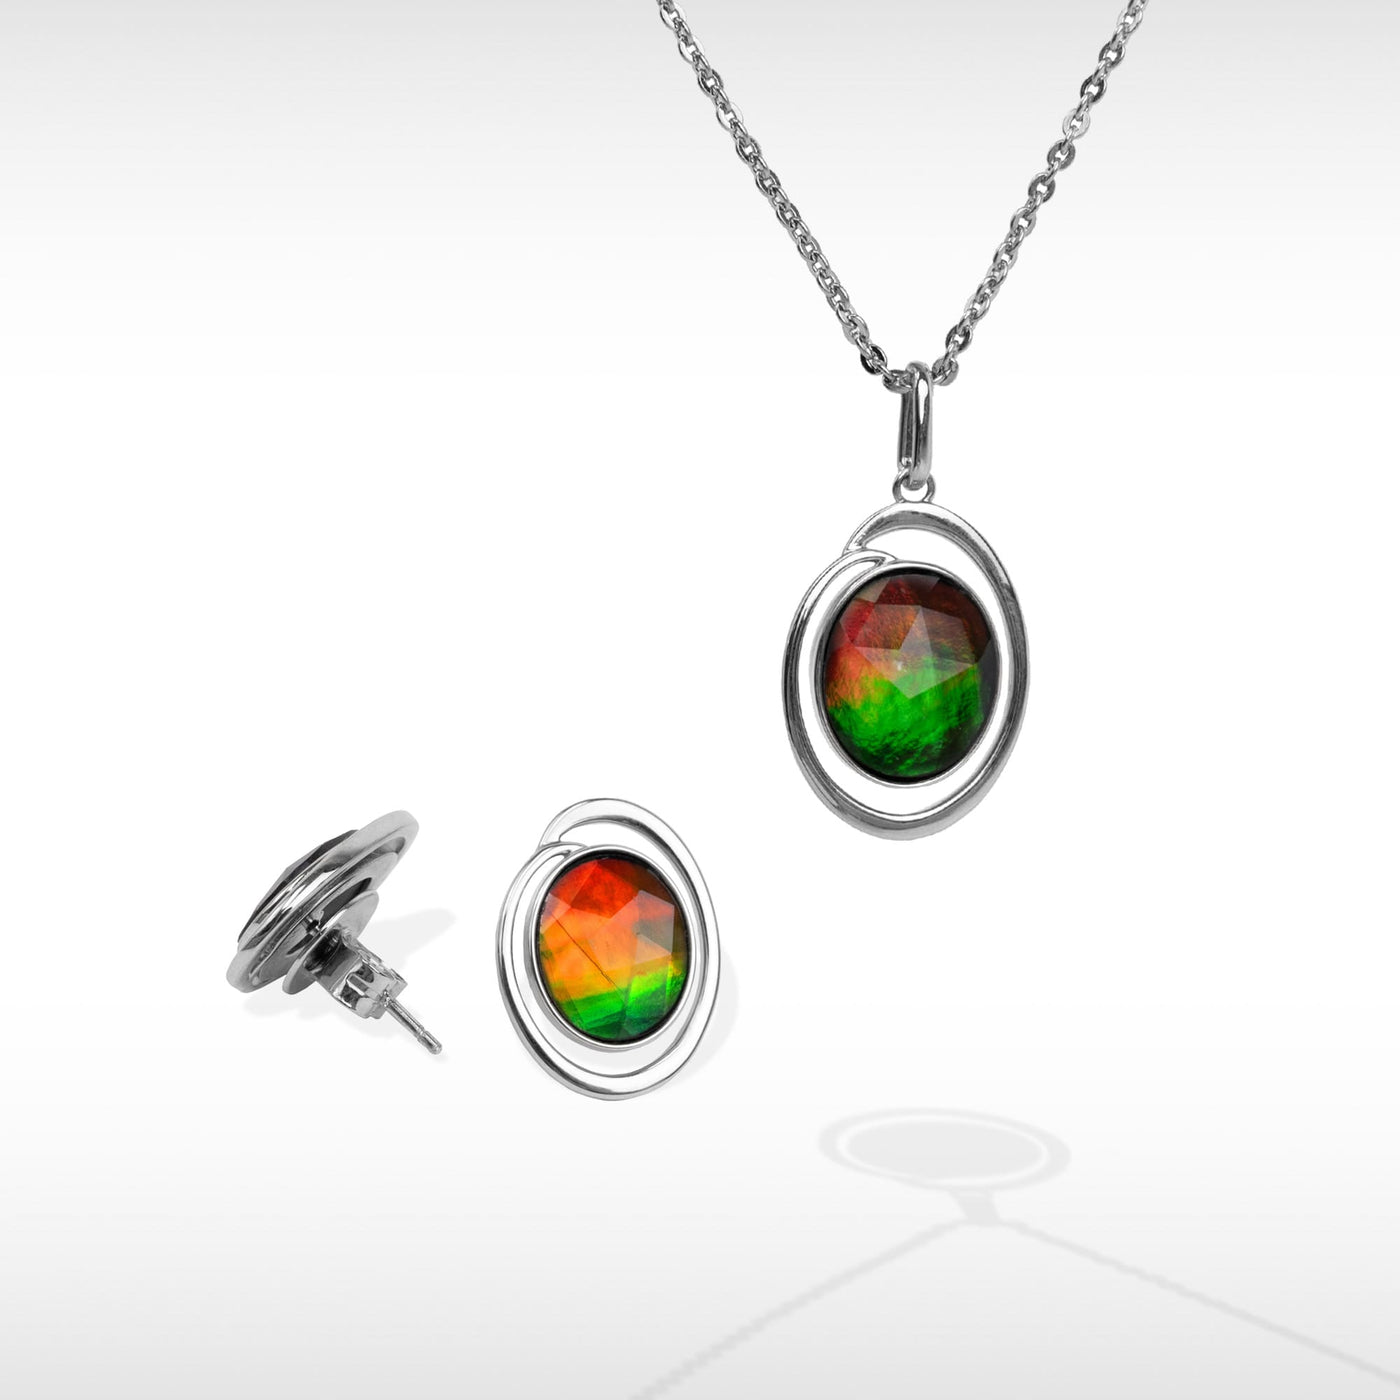 Essentials oval ammolite pendant and earring set in sterling silver